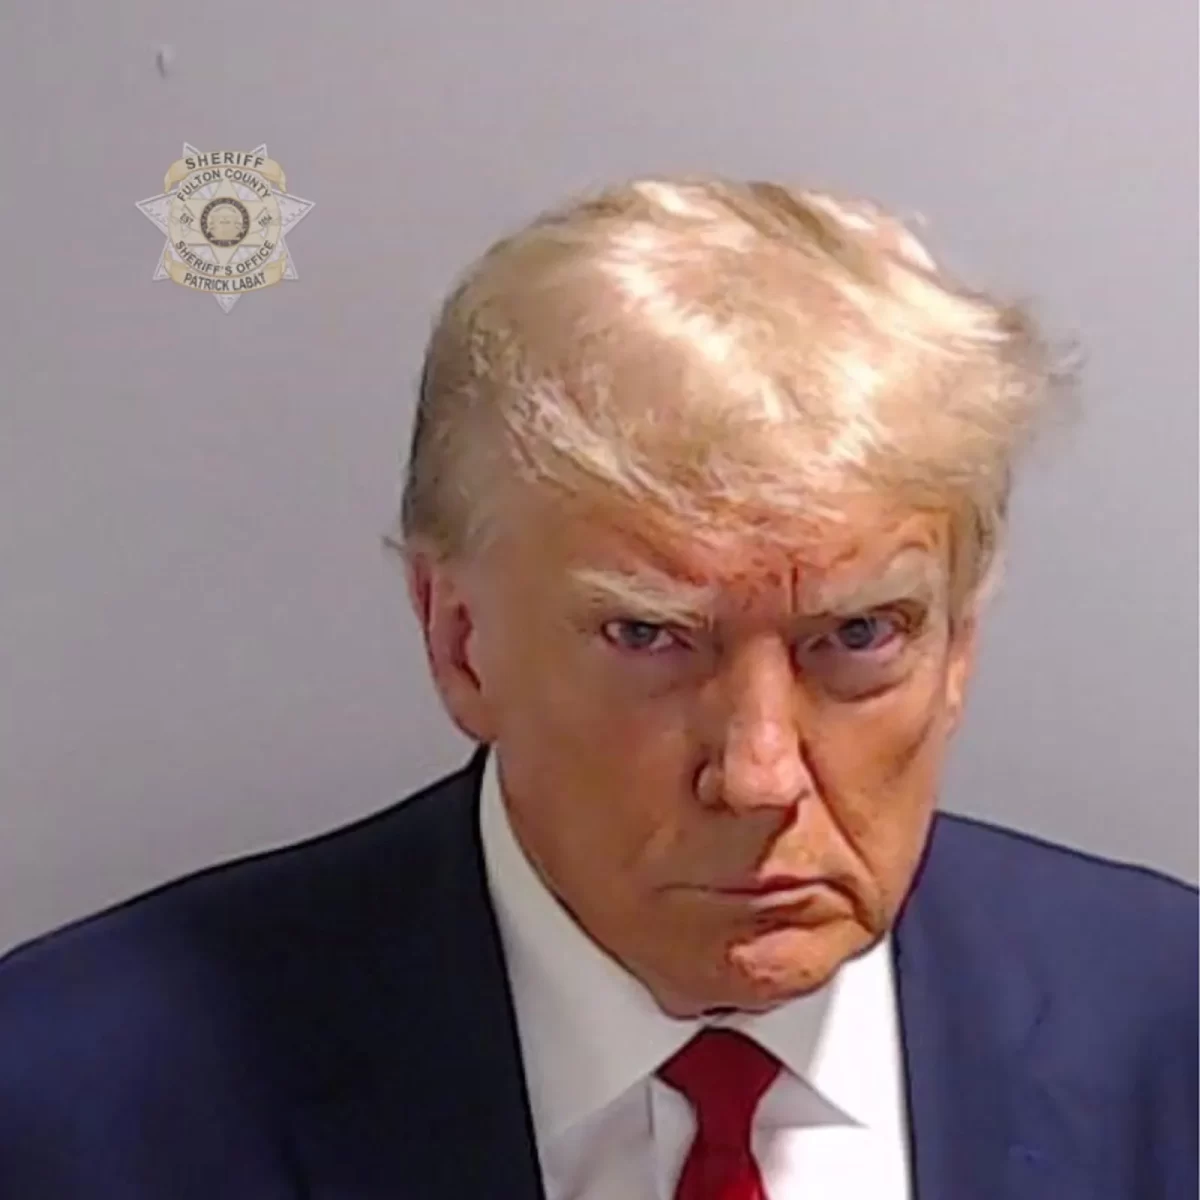 Donald Trumps mugshot, the first ever of a former U.S. president.